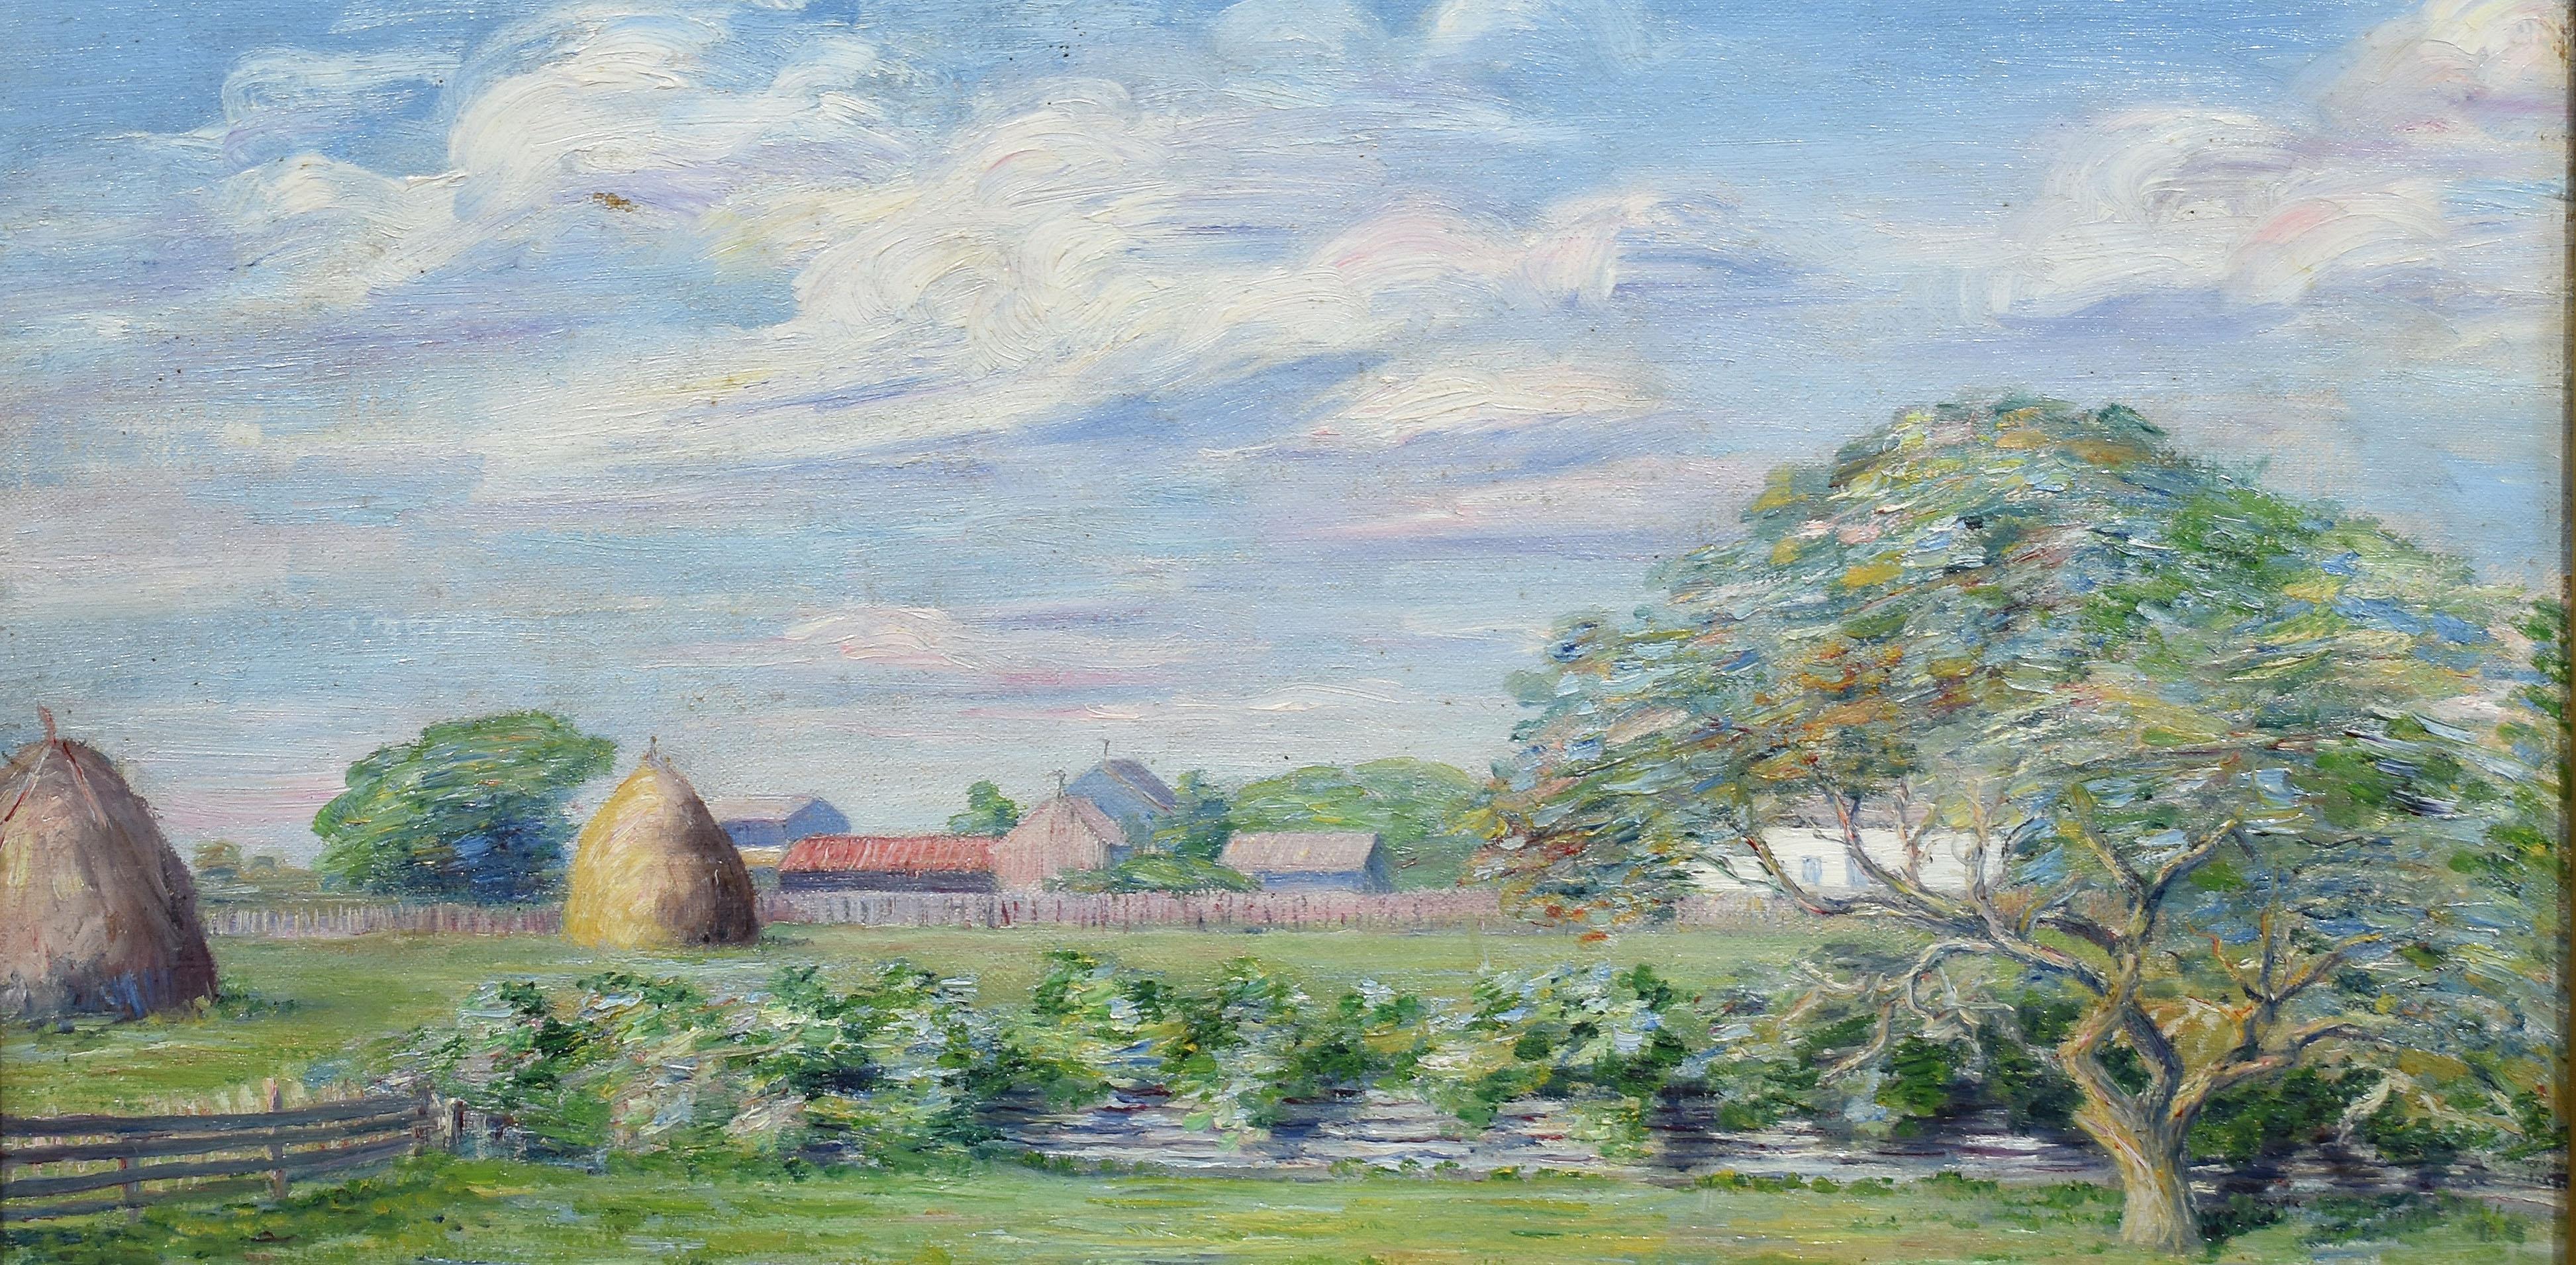 Impressionist Landscape Oil Painting of a Farm by Lucy Hariot Booth 2